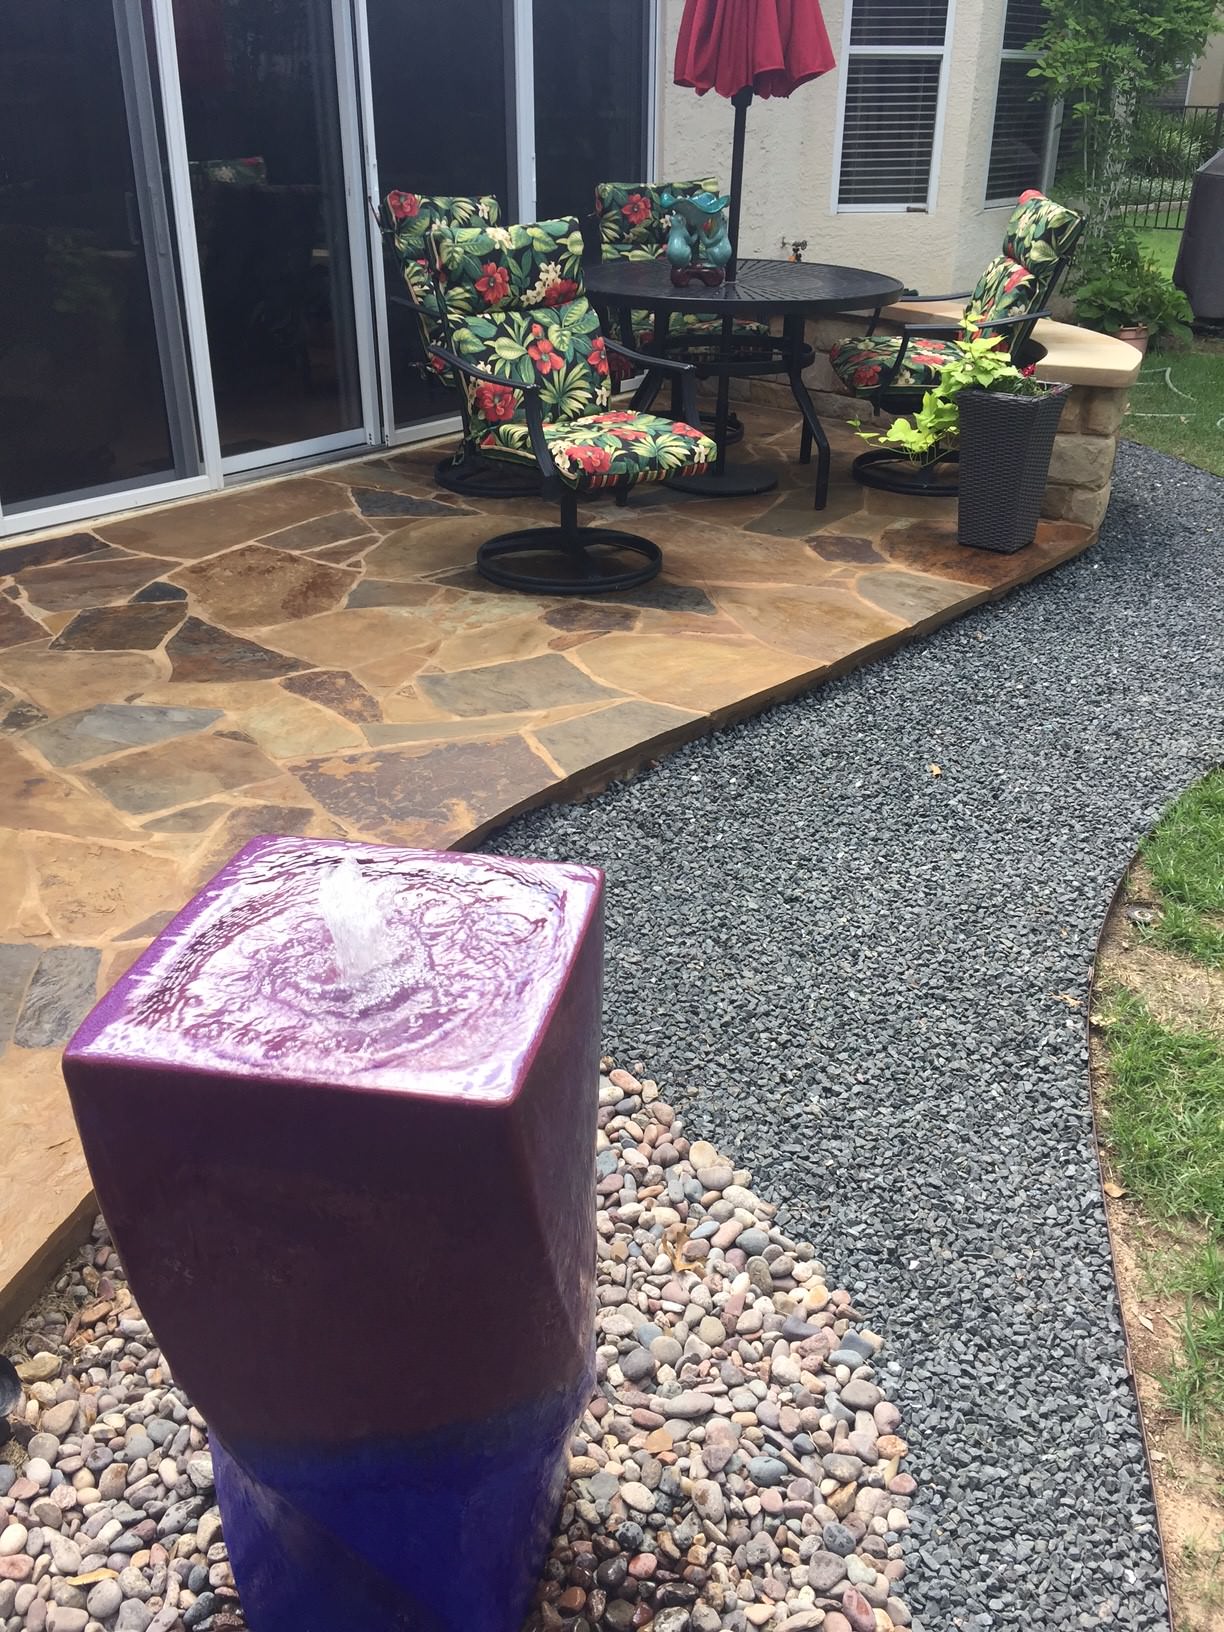 Flagstone patio, basalt and pondless water feature